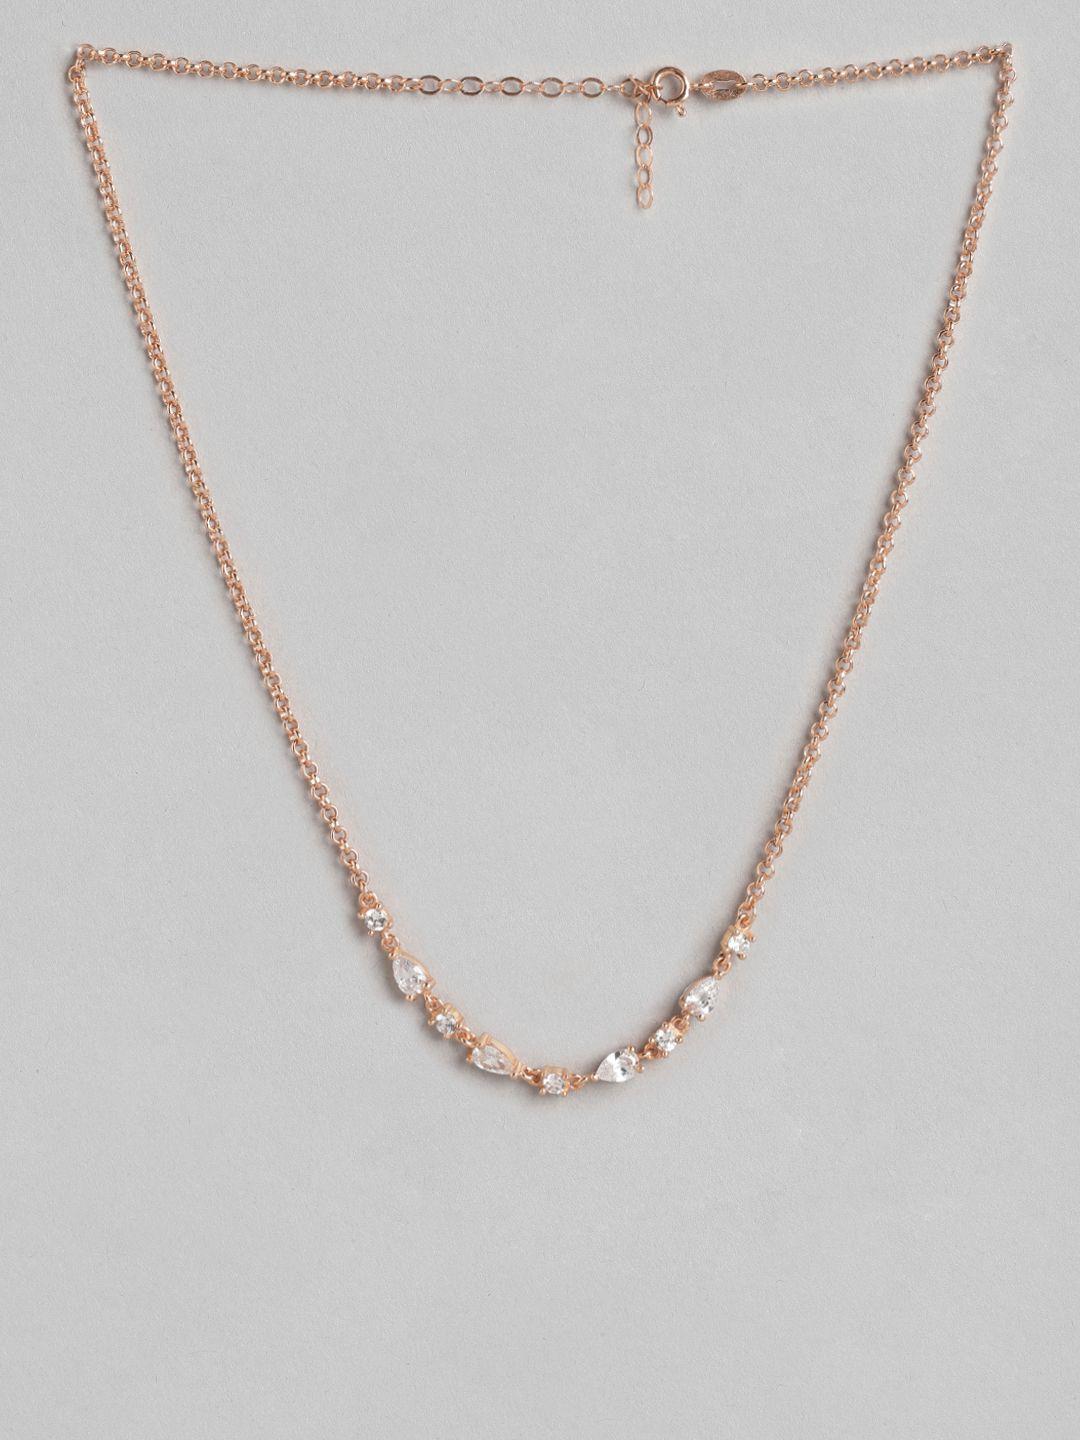 carlton london brass rose gold-plated necklace